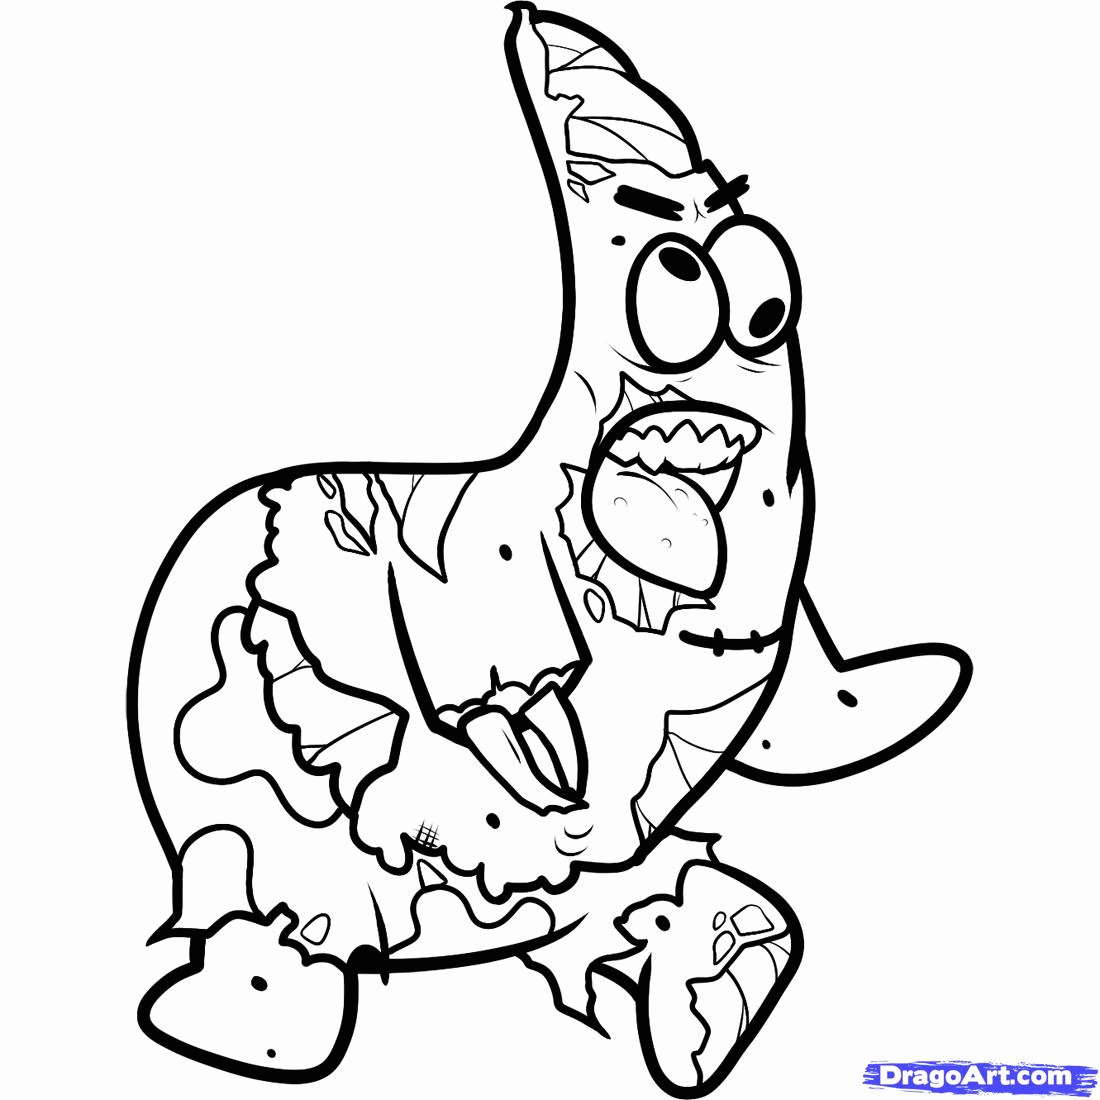 Zombie Coloring Pages - Coloring Style Pages